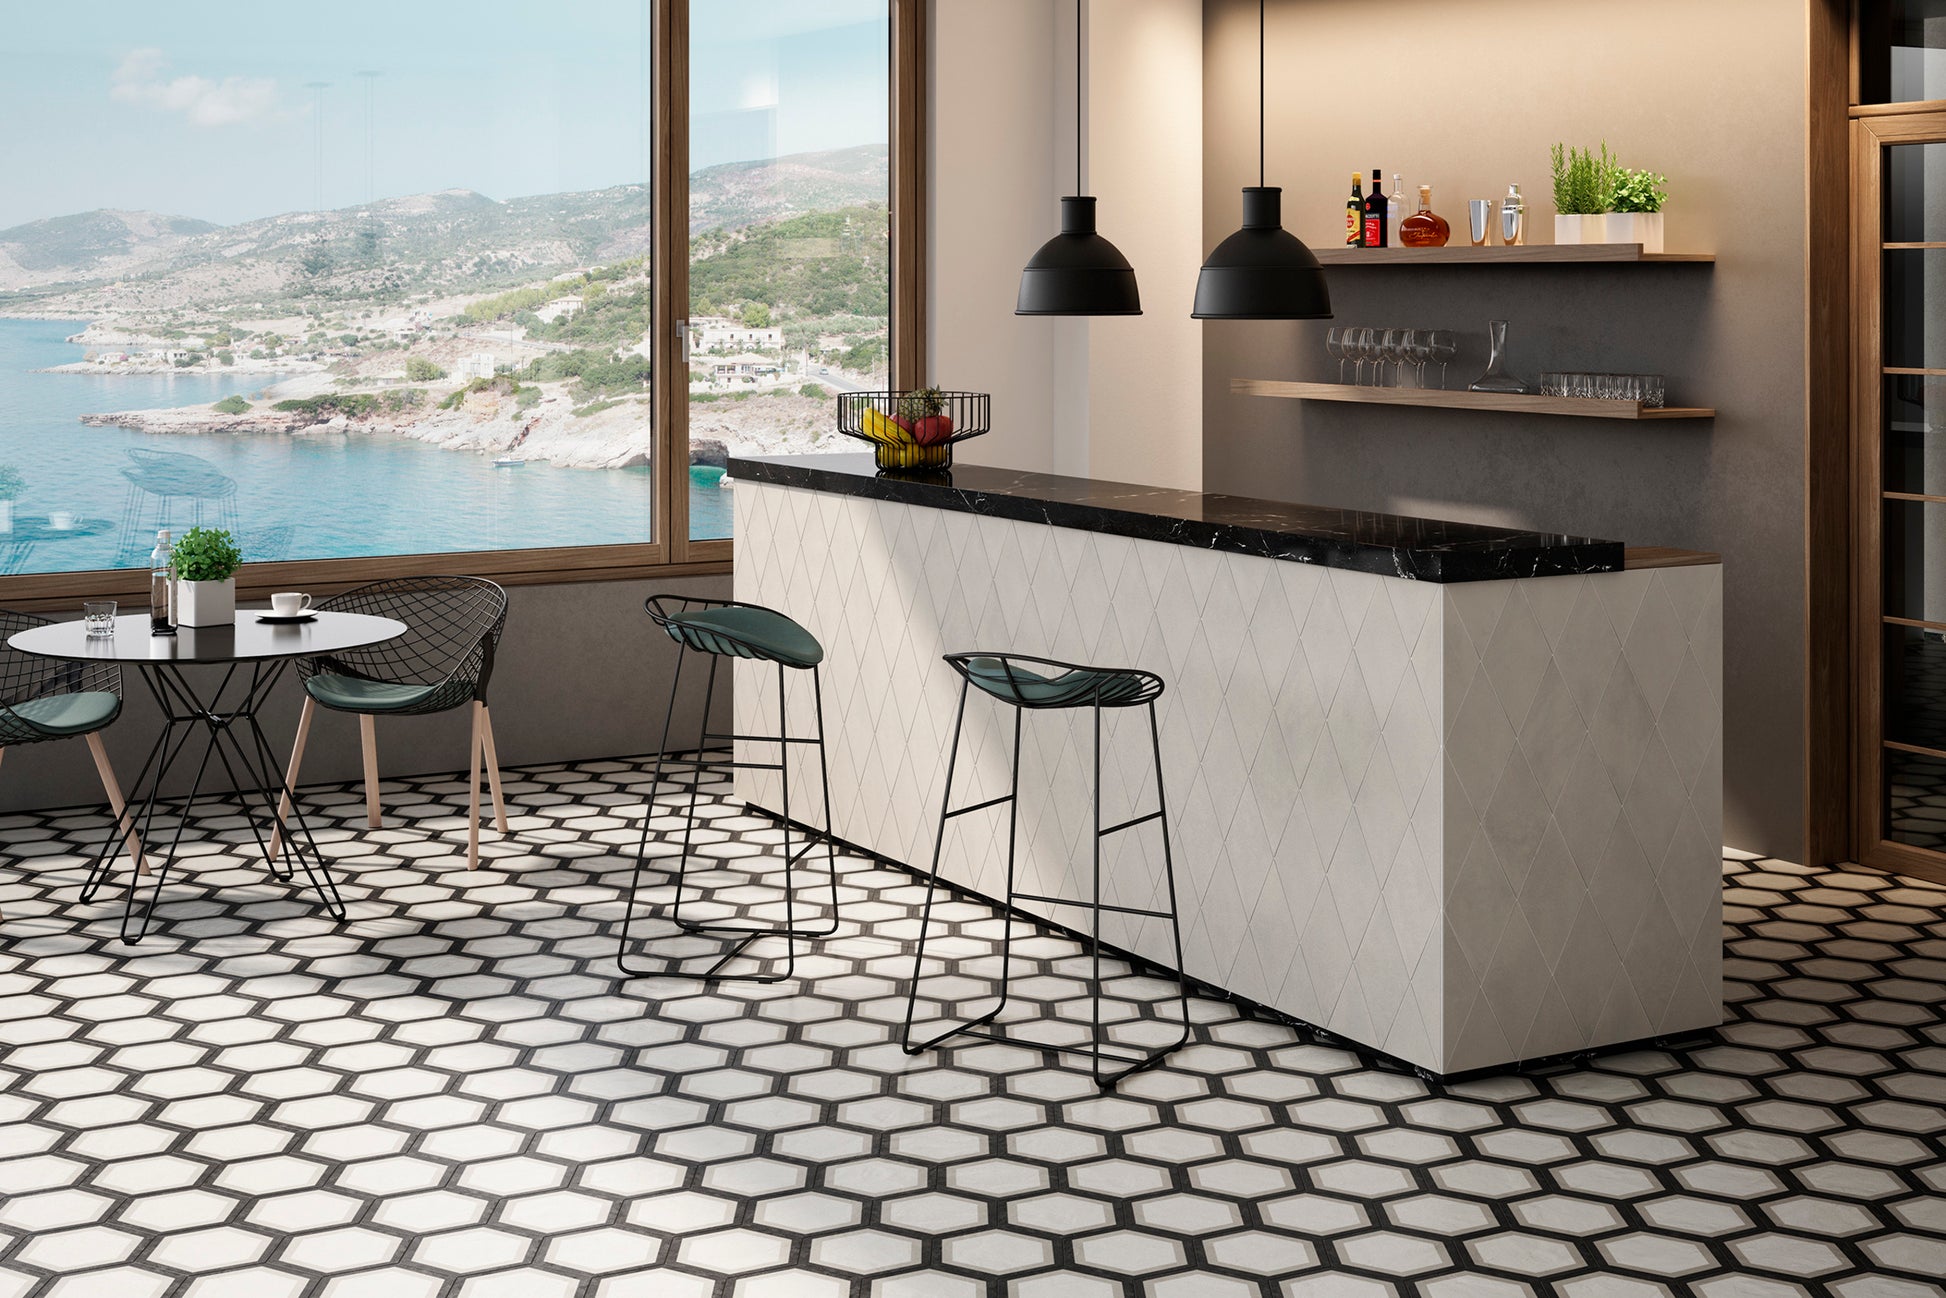 Restaurant overlooking ocean few with bar to the right and a table and two chairs to the left. The floor is the decorative hexagon field tile in the style of Teliano.